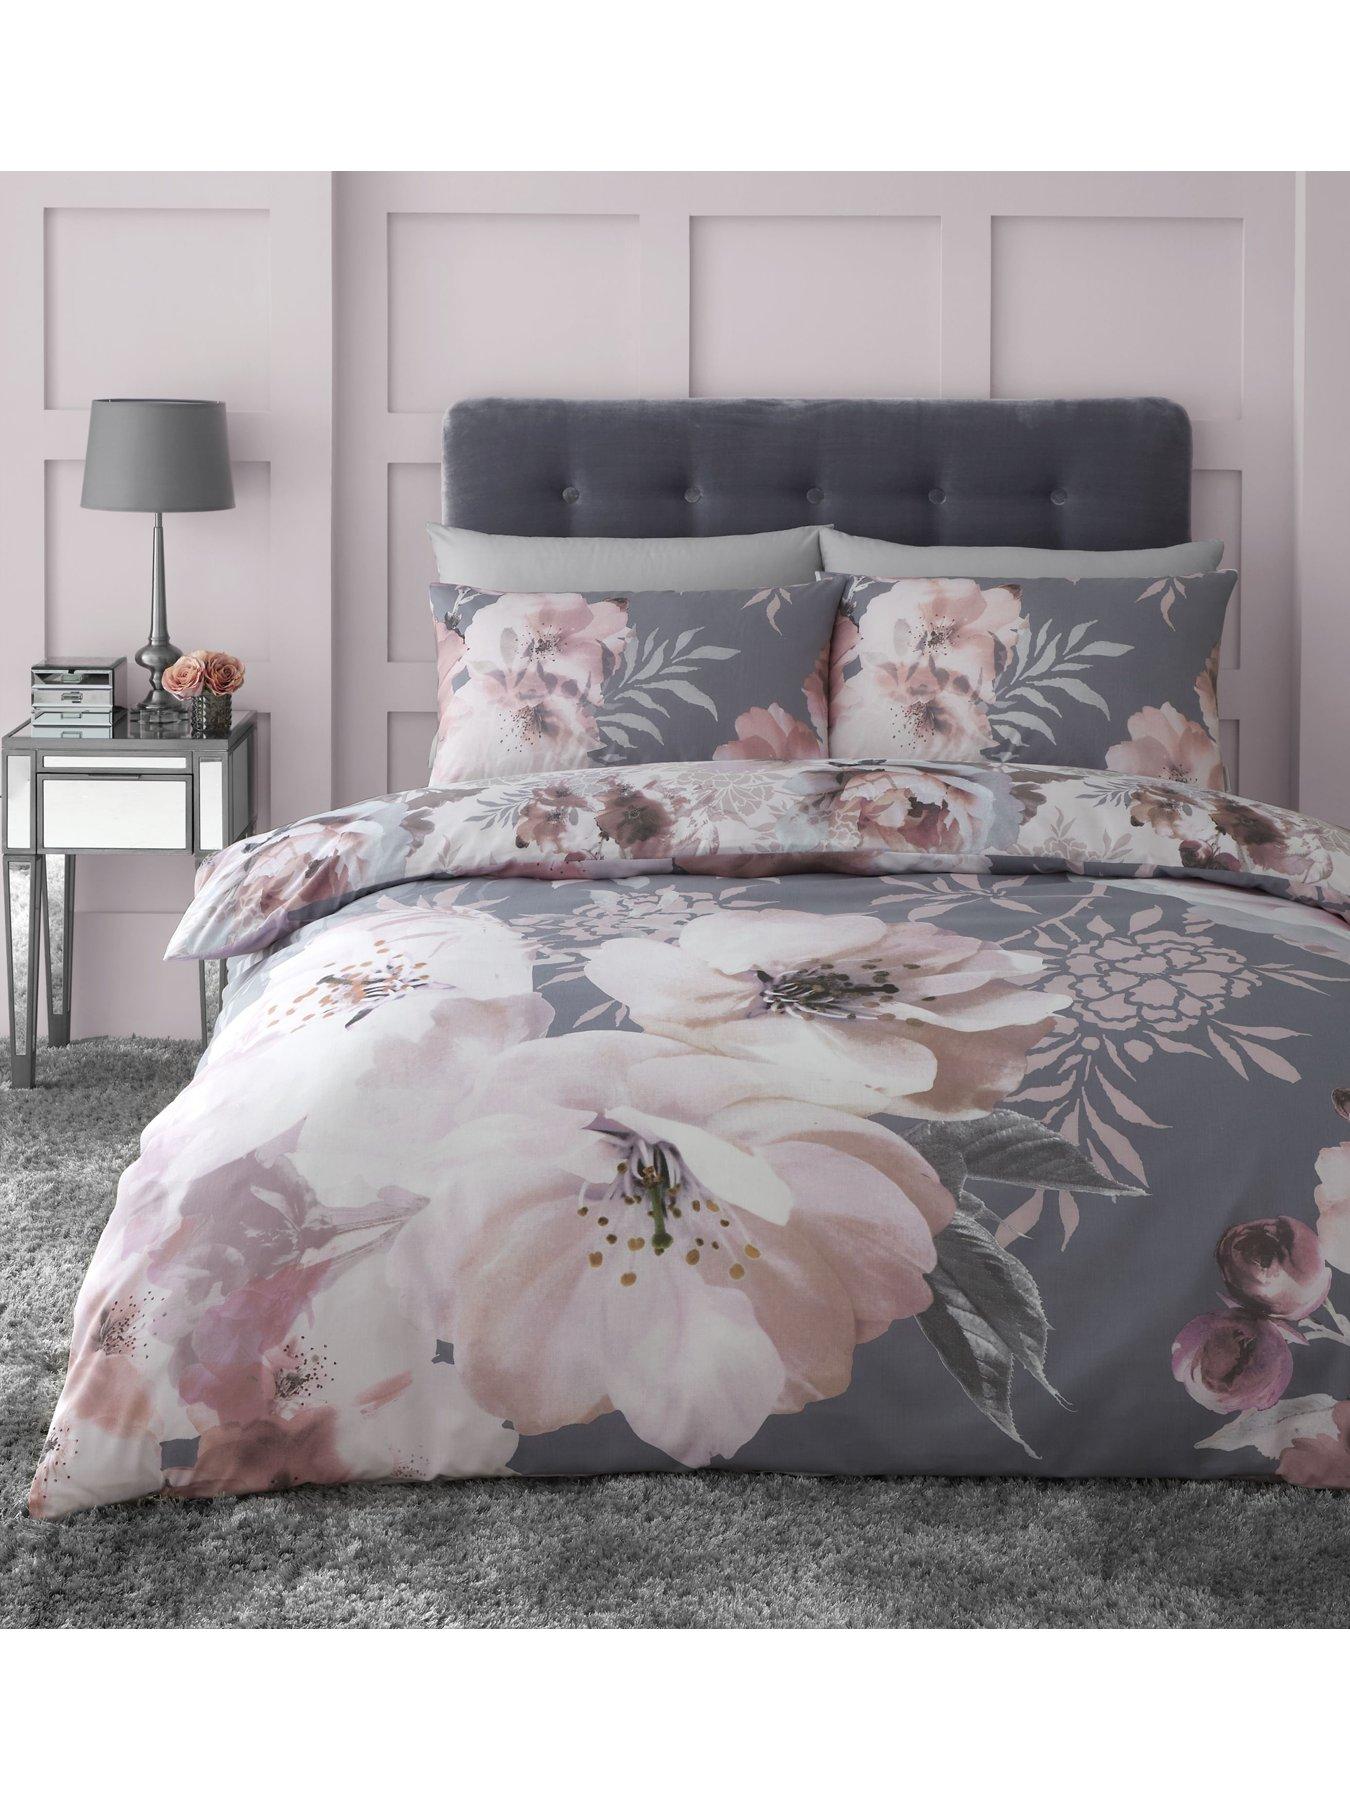 Catherine Lansfield Tufted Print Geo Natural Duvet Cover and Pillowcase Set